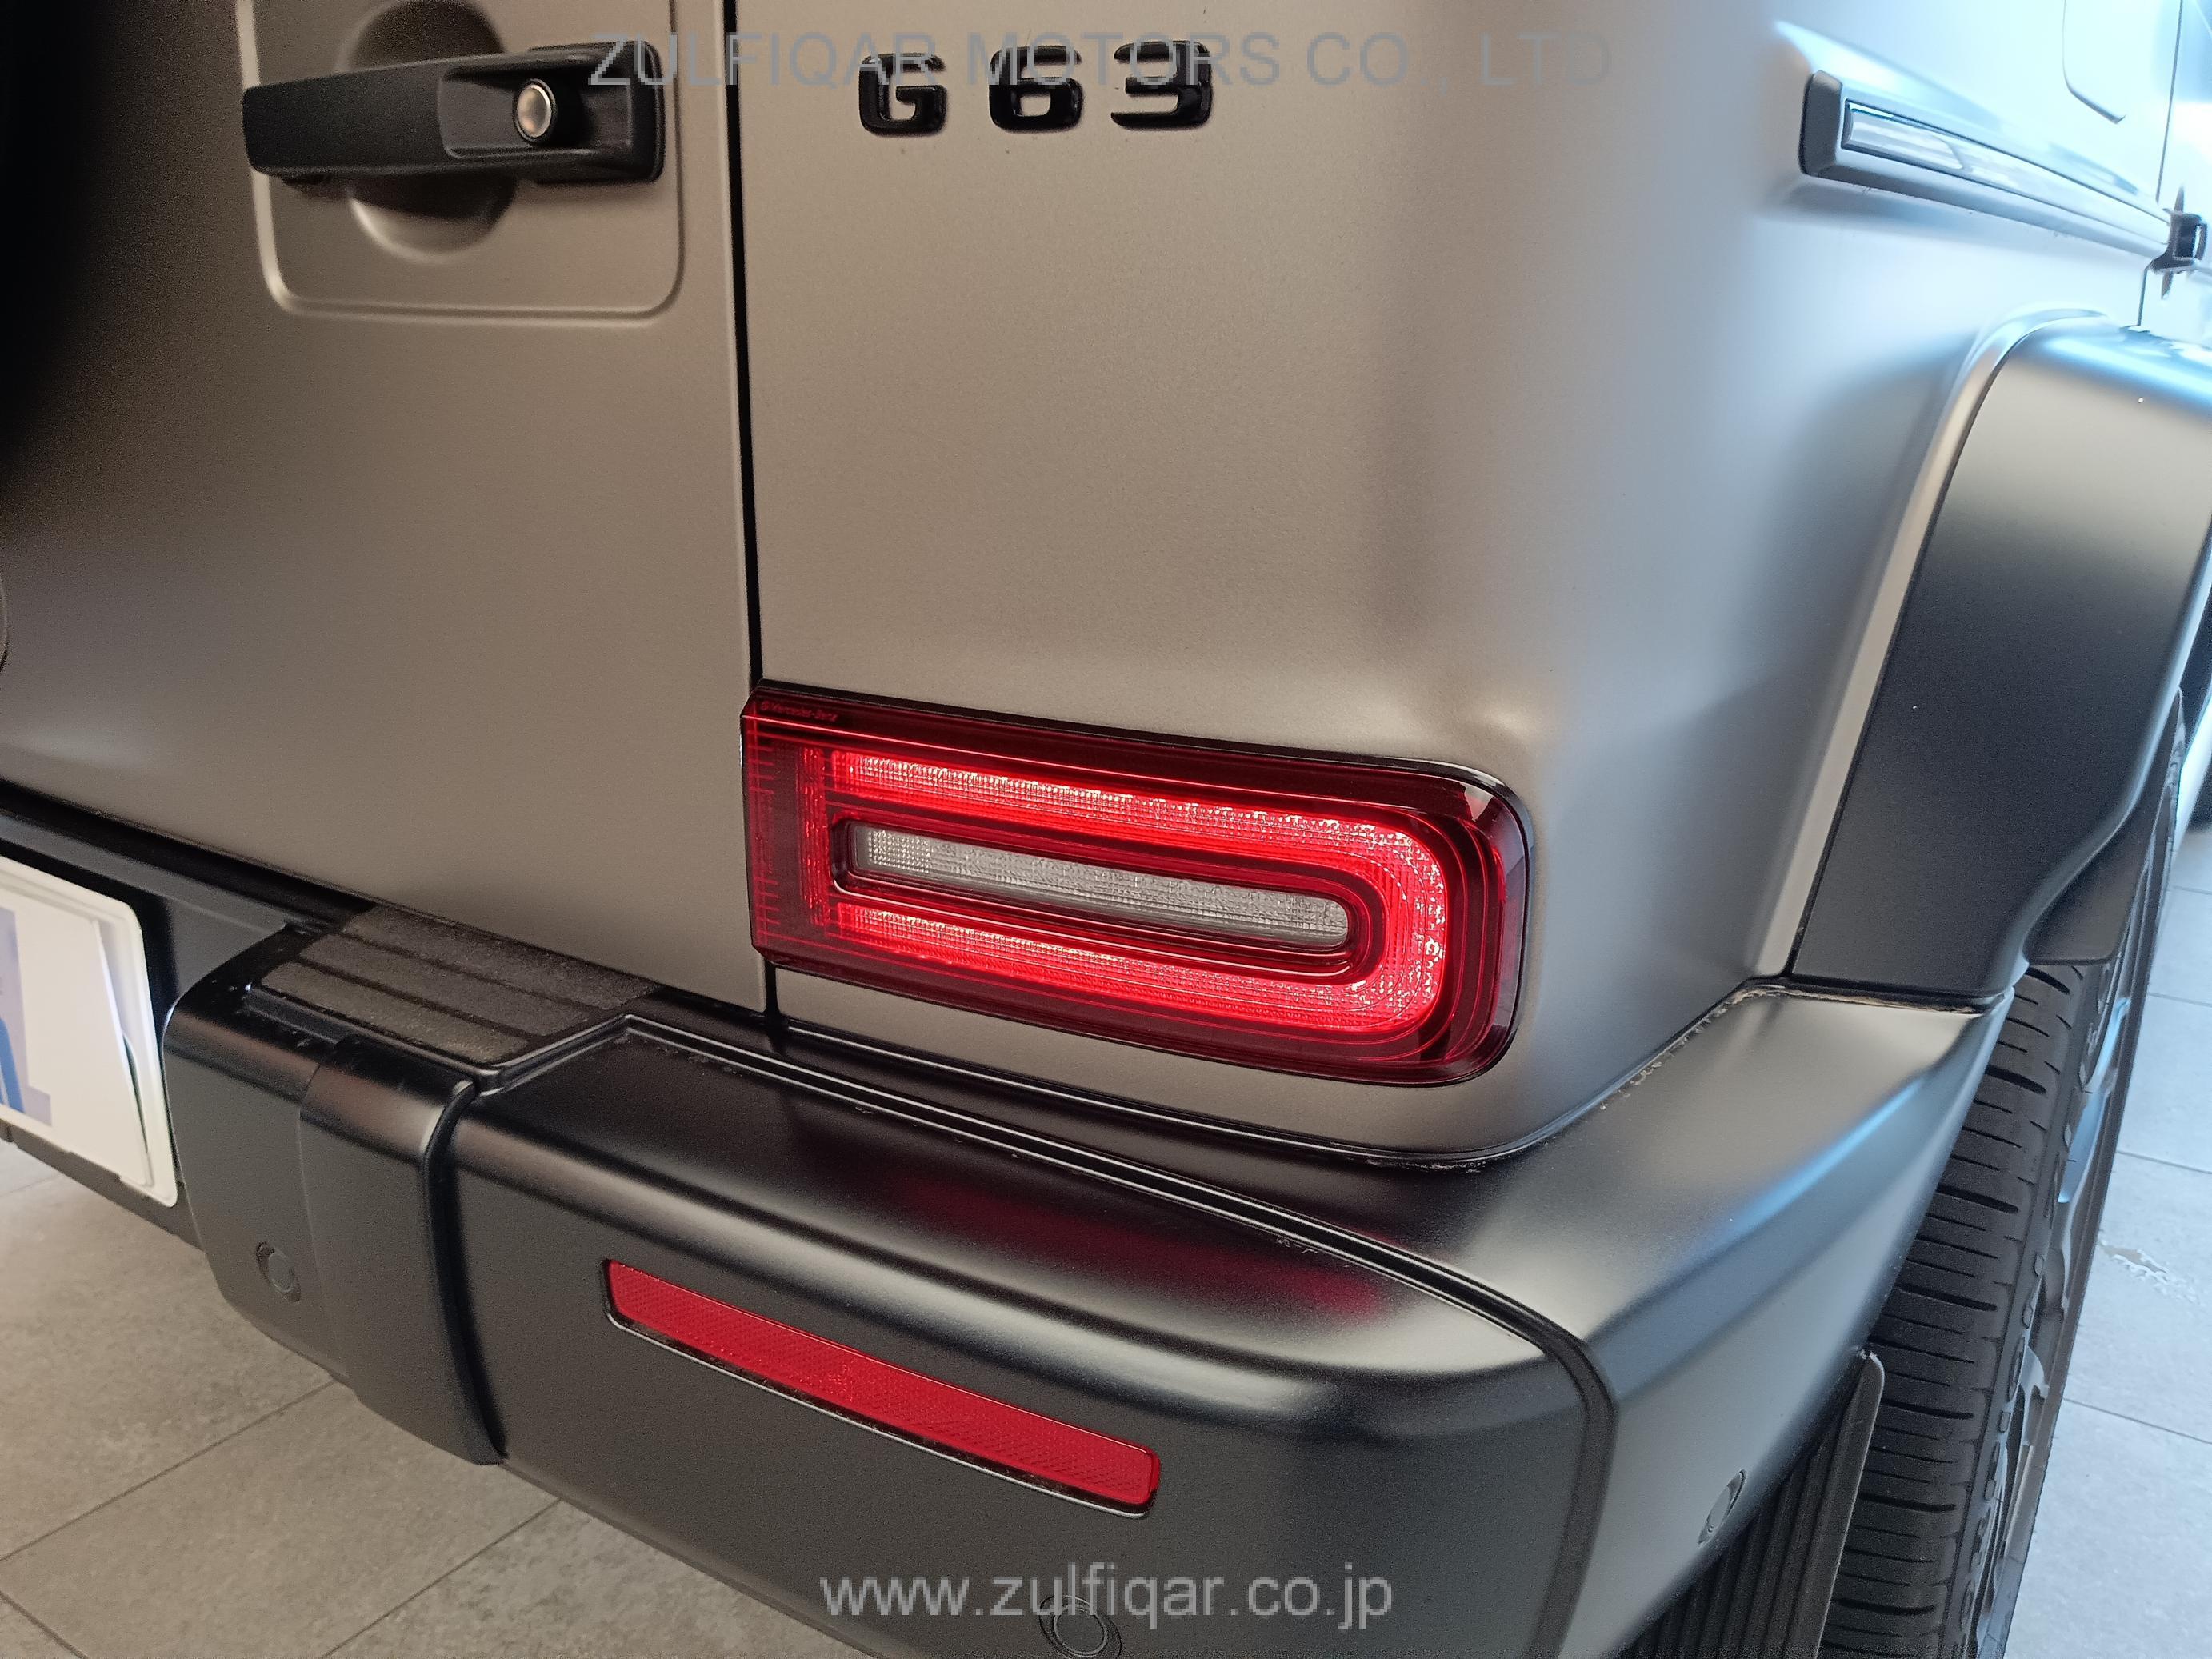 MERCEDES AMG G CLASS 2021 Image 82